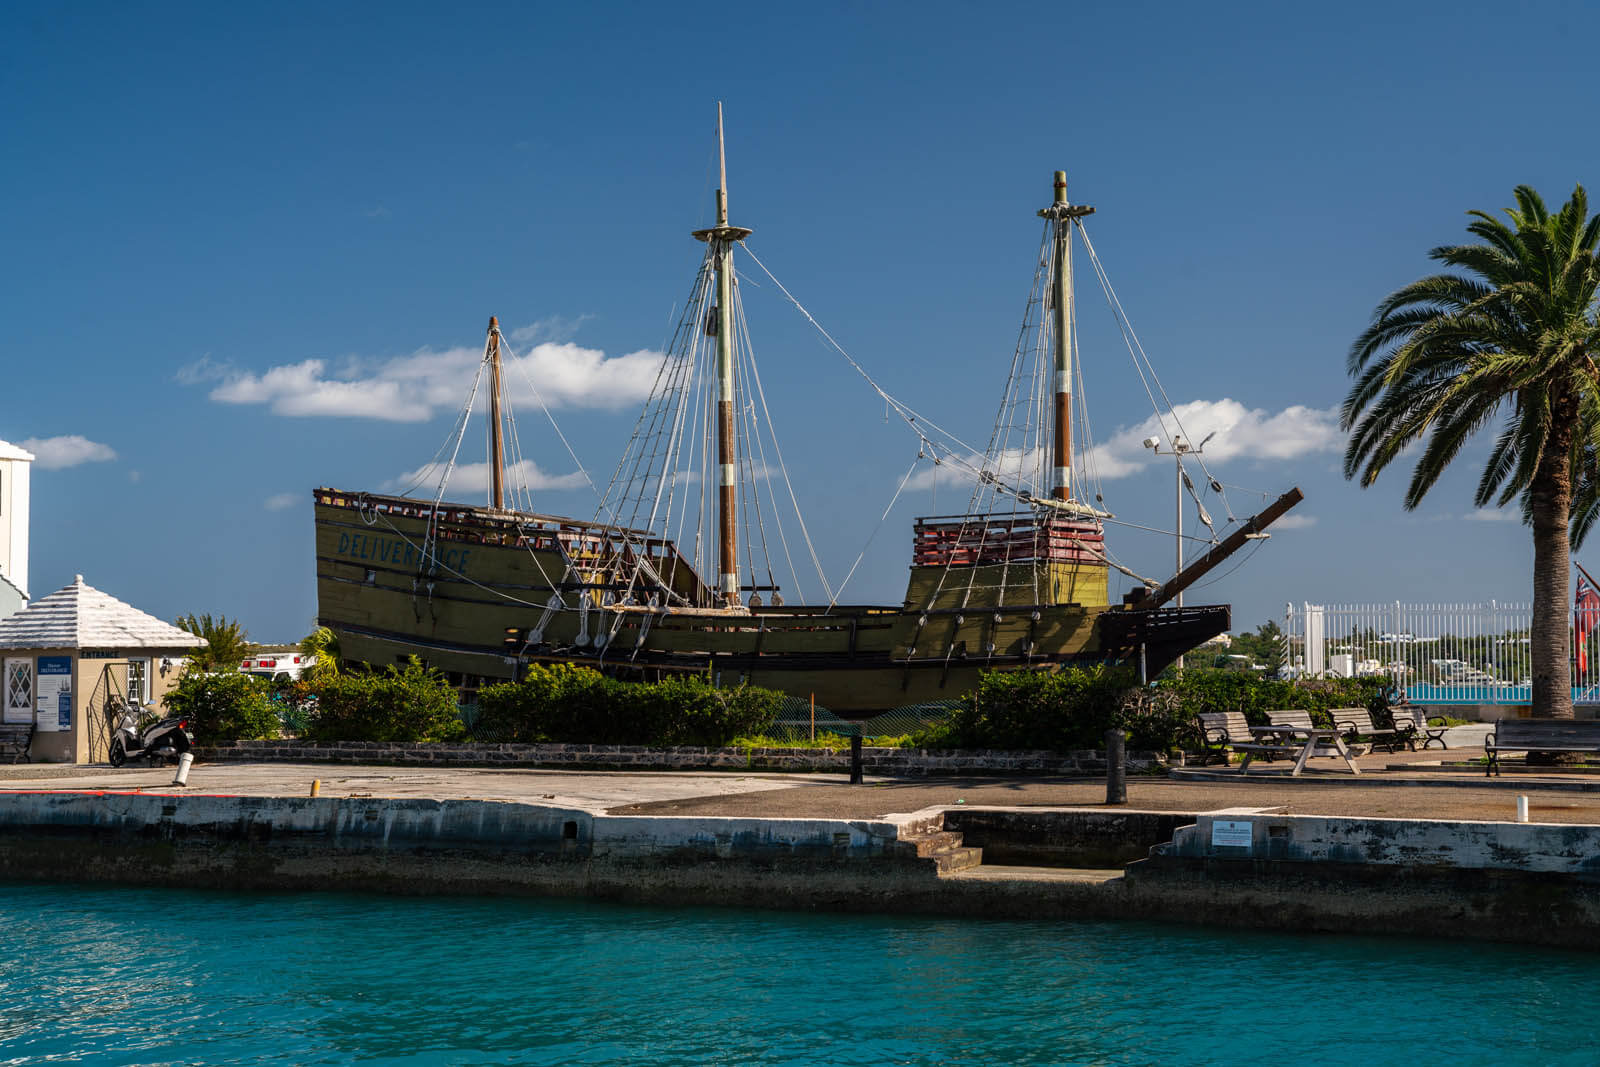 old ship at Kings Square at the Town of St Georges in Bermuda